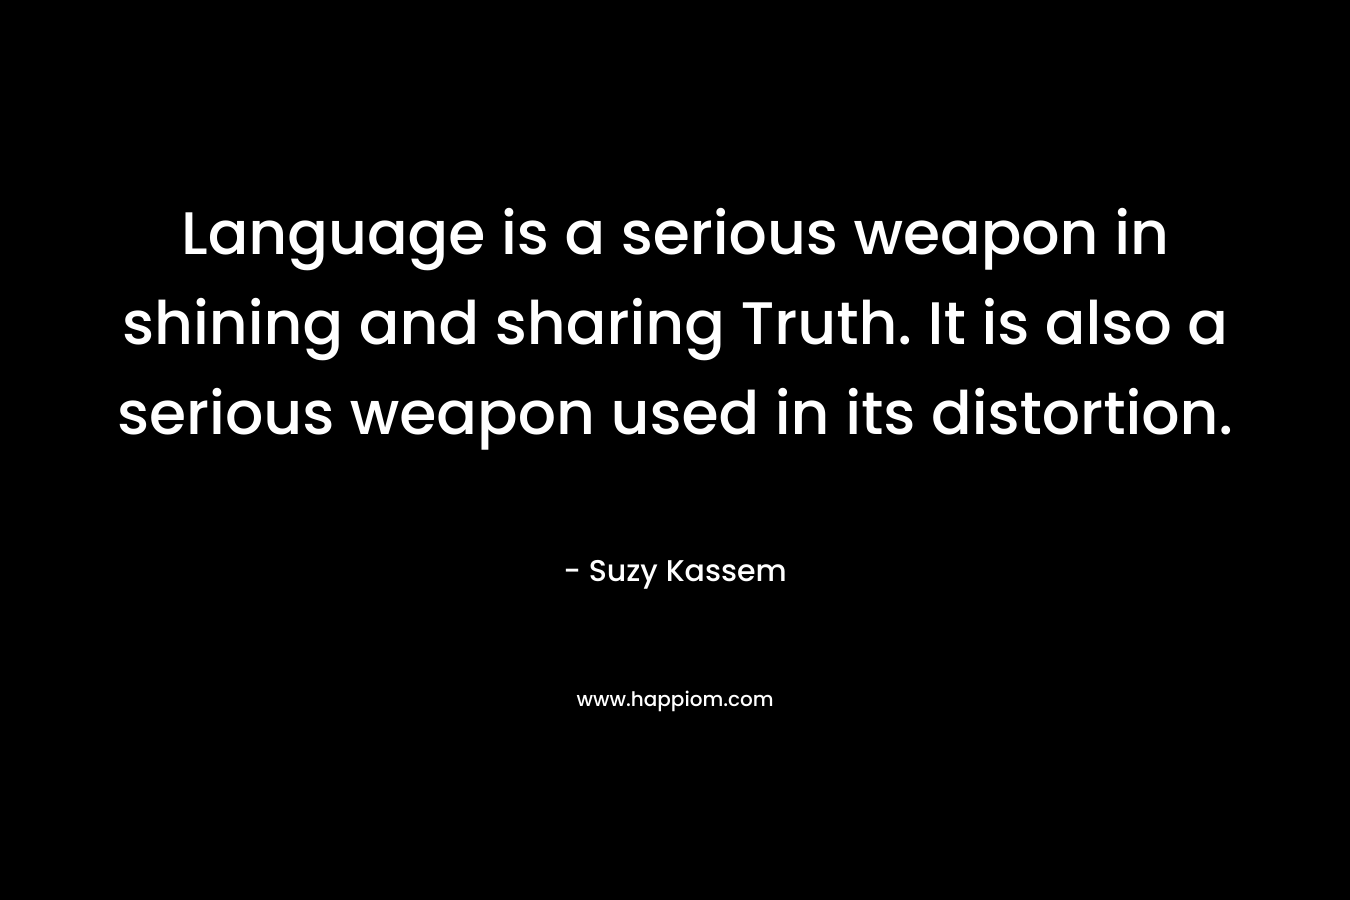 Language is a serious weapon in shining and sharing Truth. It is also a serious weapon used in its distortion.